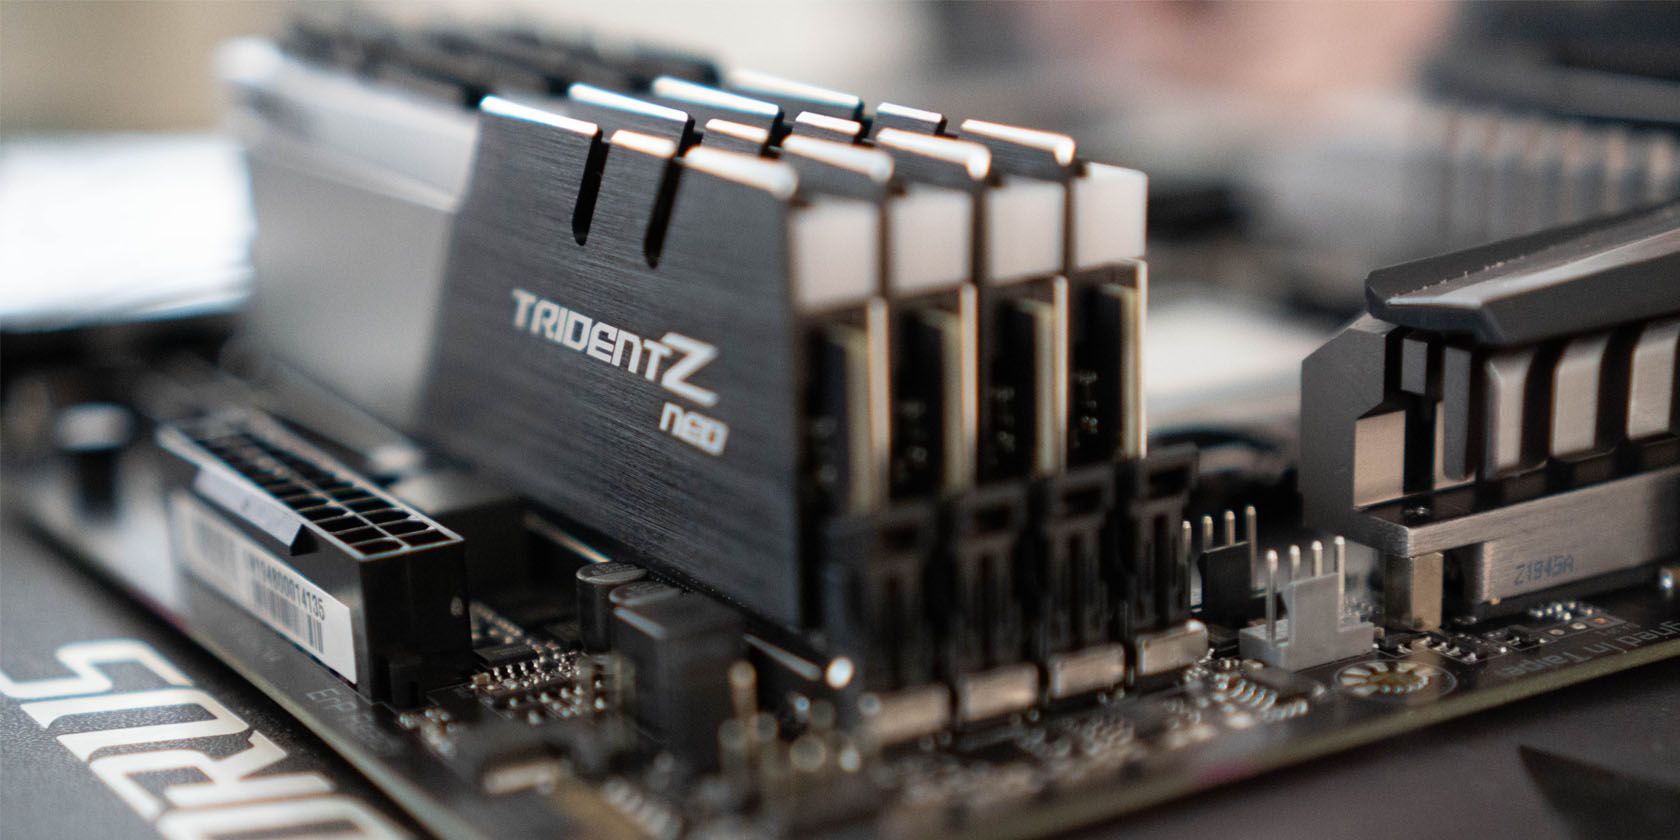 G Skill Trident Z RAM Close-Up Feature Image